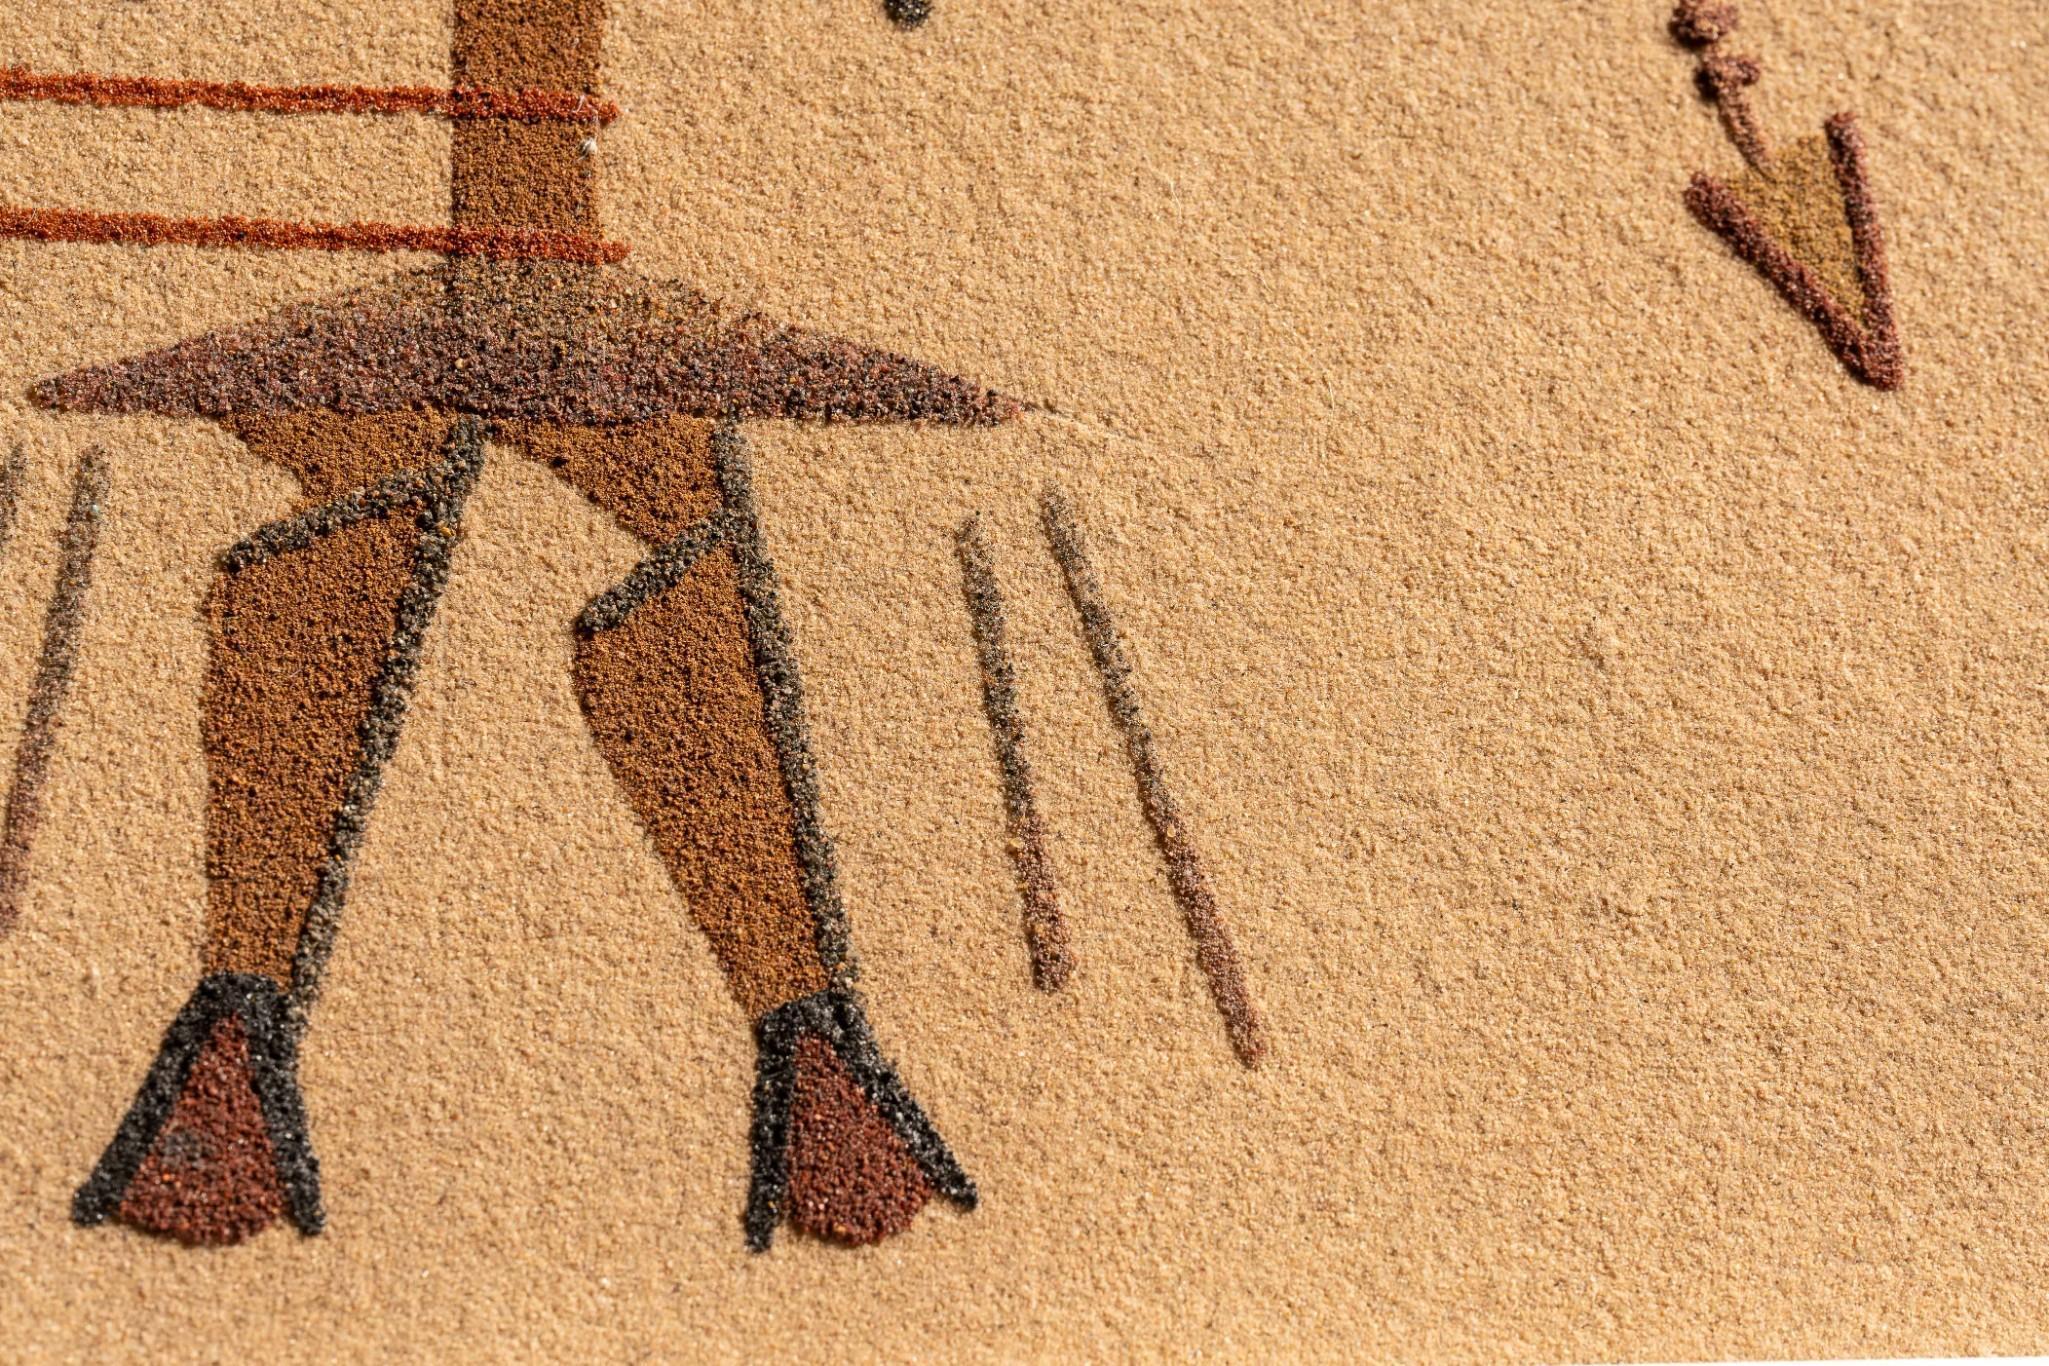 Abstract Native American Illustration On Sandpaper